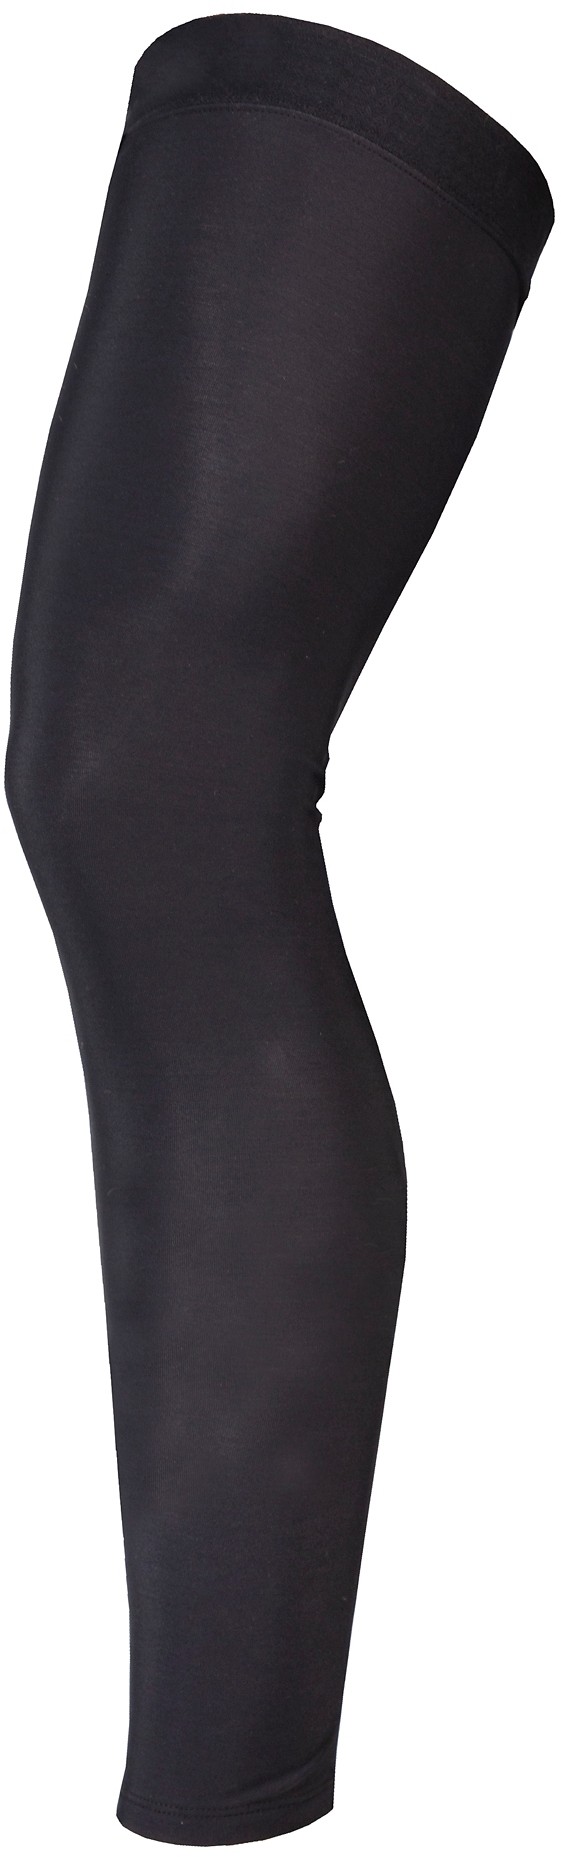 FS260 Thermo Leg Warmers image 0